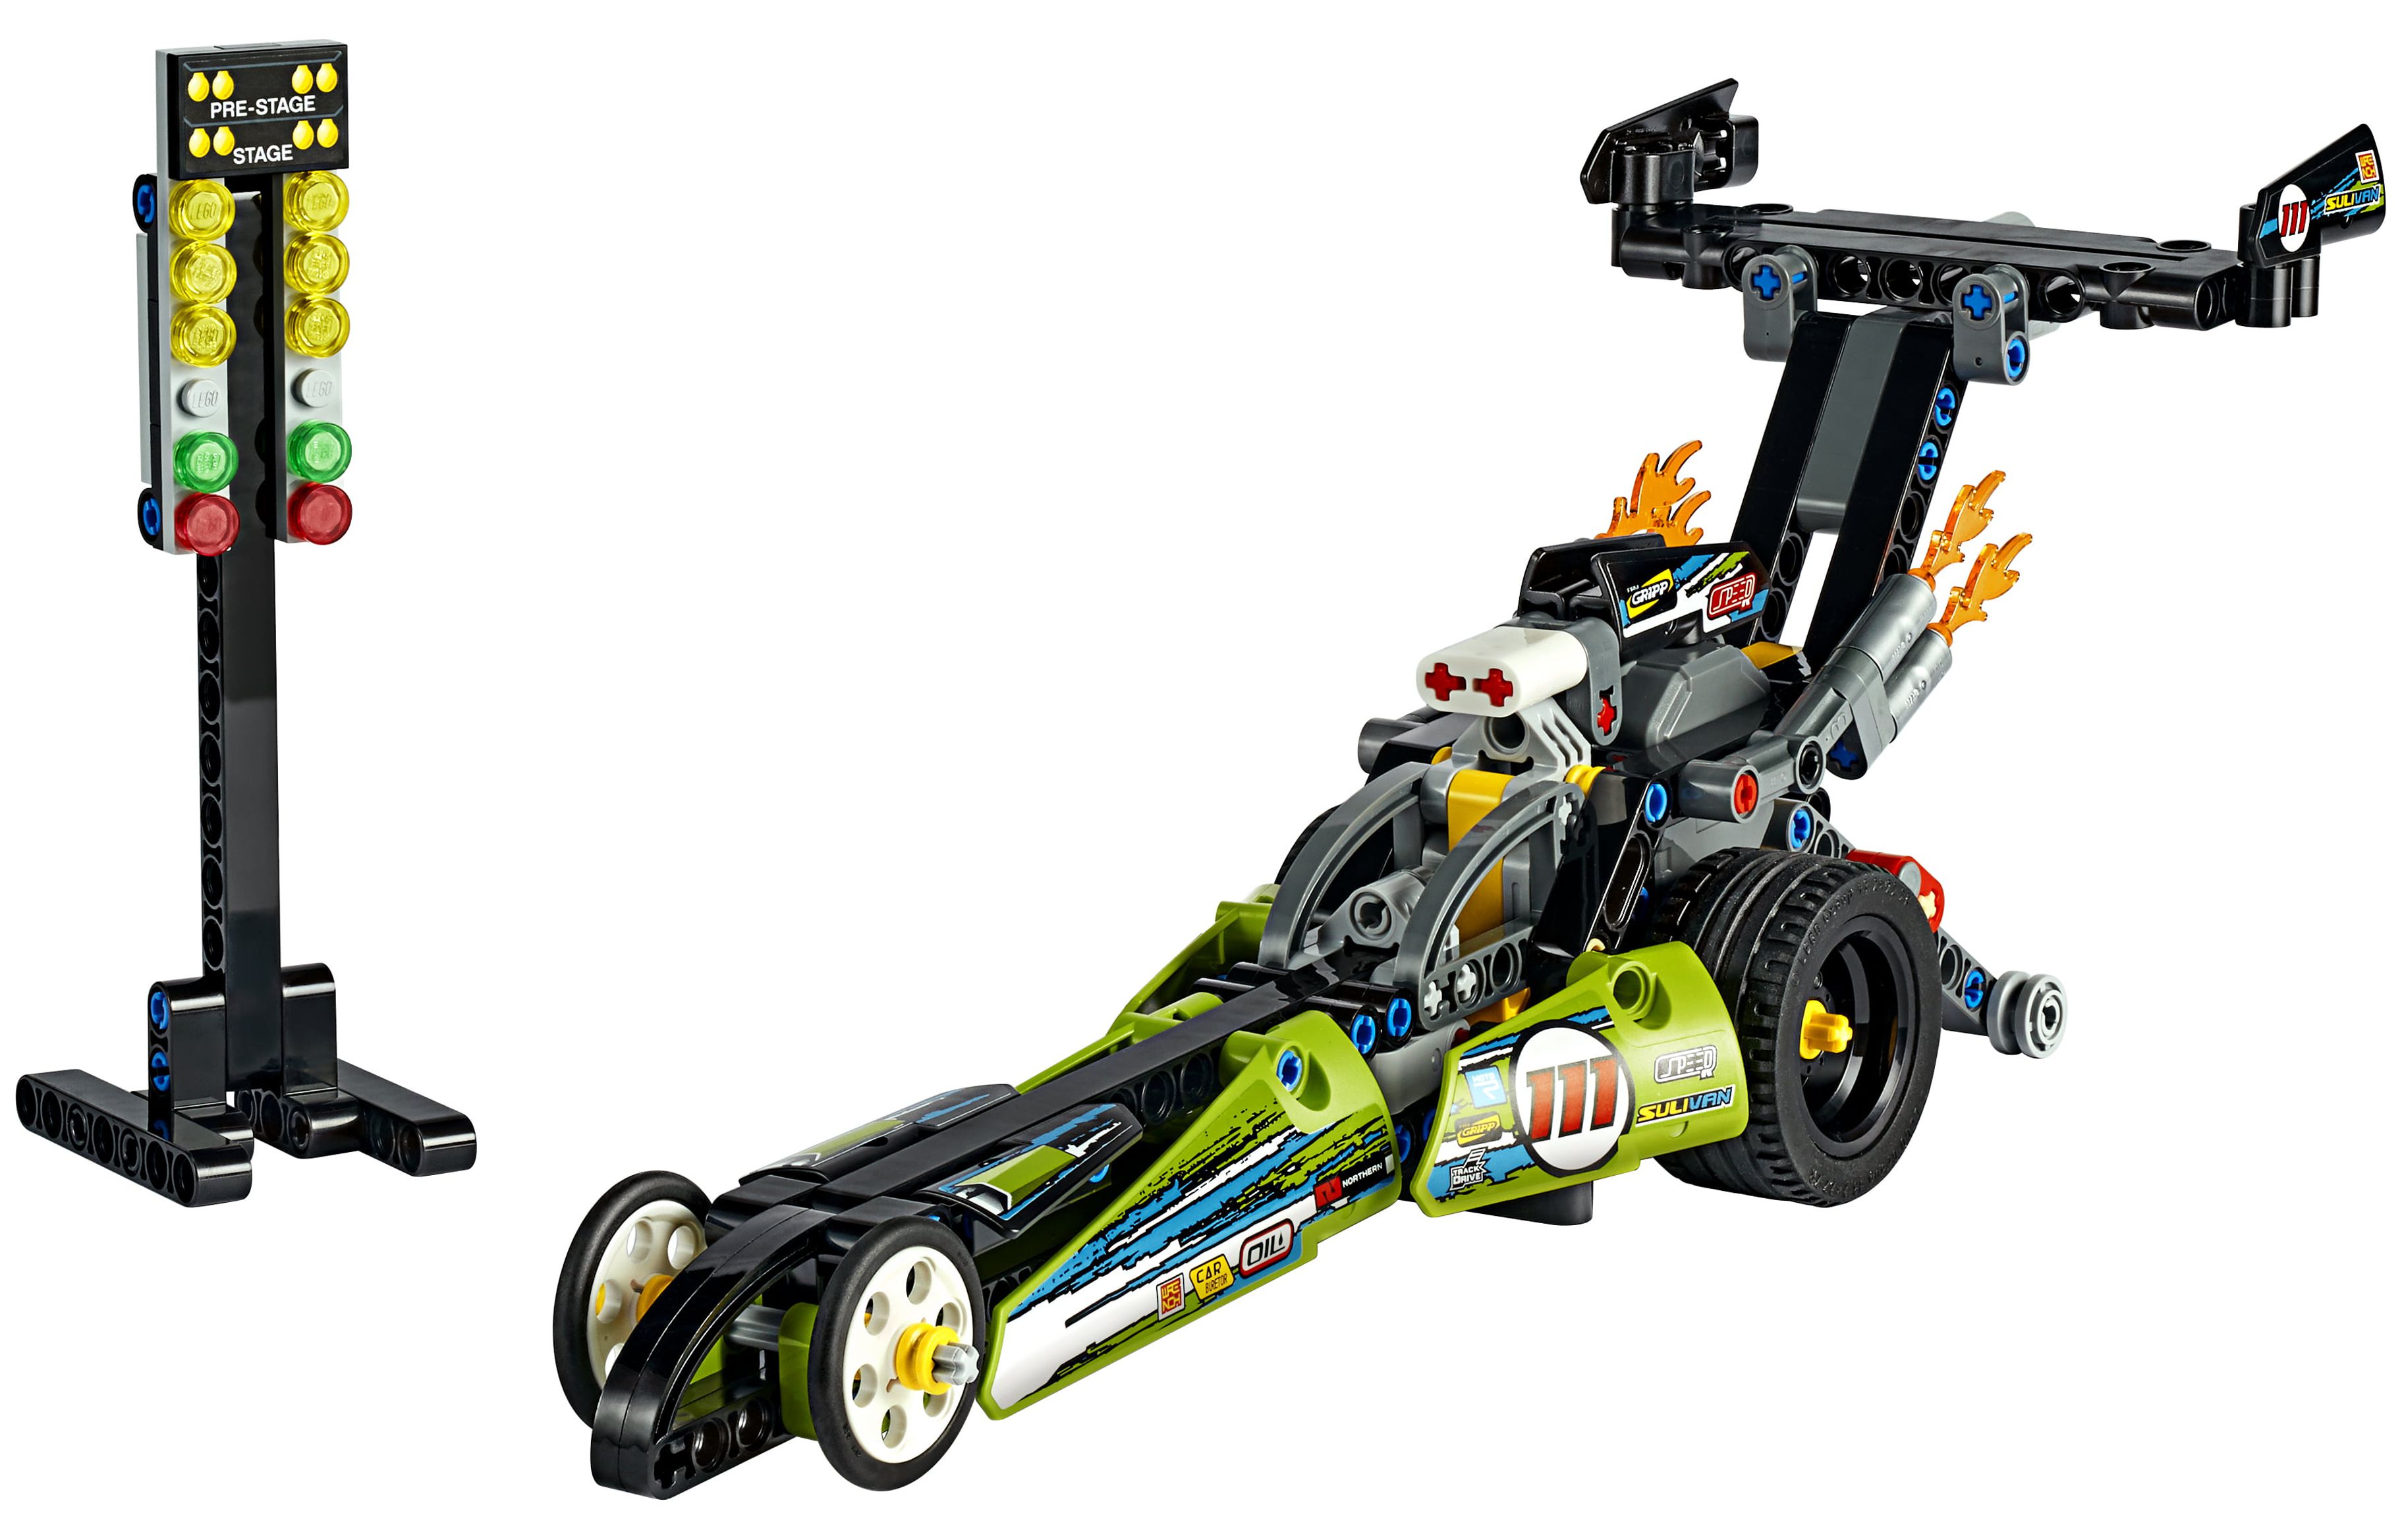 LEGO Technic Dragster 42103 Pull-Back Racing Toy Building Kit (225 pieces) - image 3 of 7